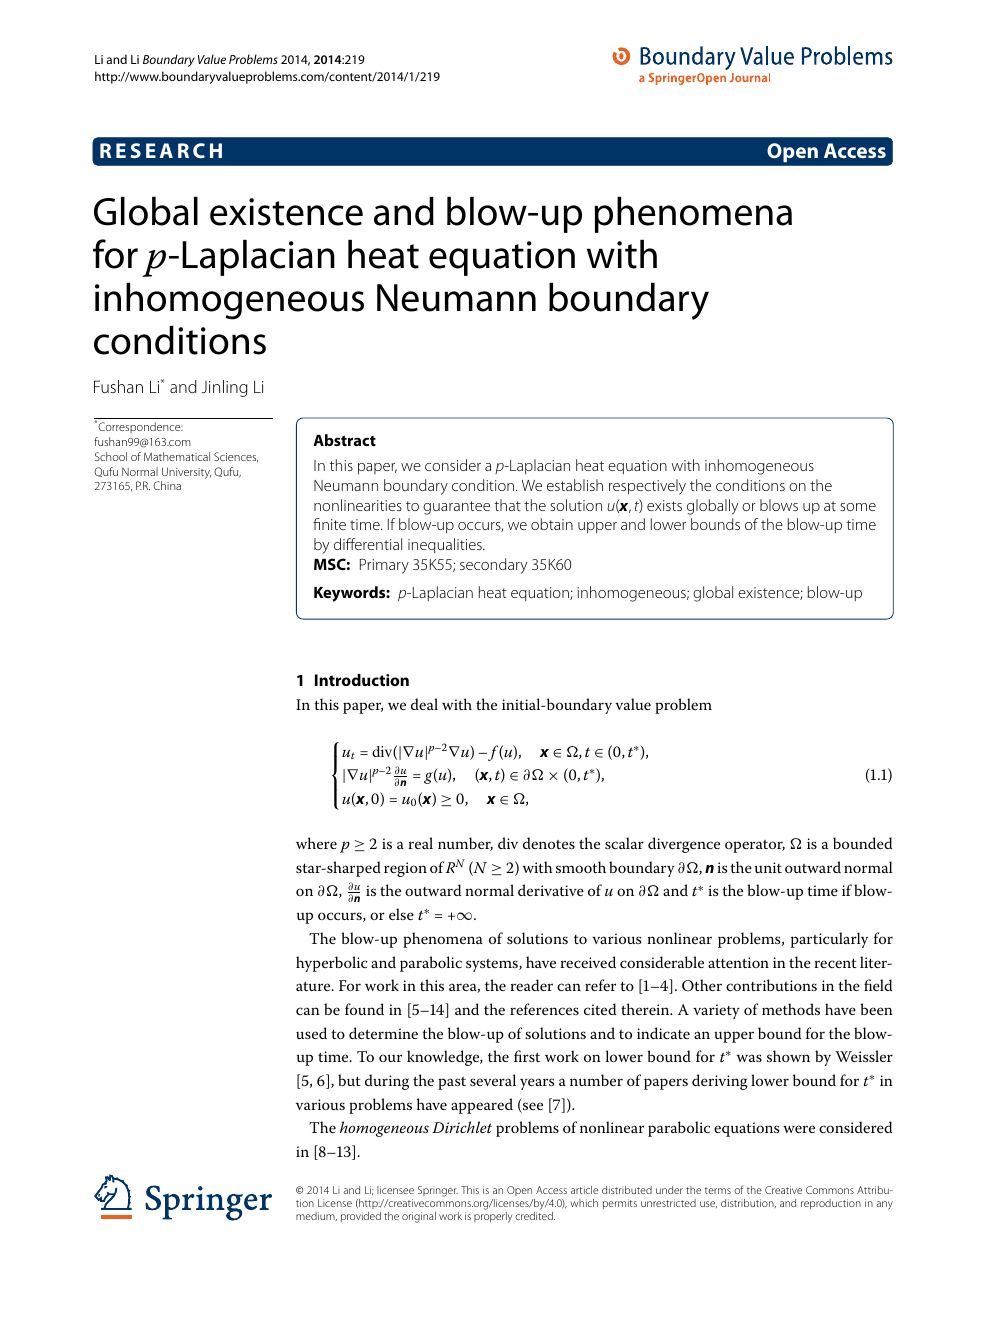 Global Existence And Blow Up Phenomena For P Laplacian Heat Equation With Inhomogeneous Neumann Boundary Conditions Topic Of Research Paper In Mathematics Download Scholarly Article Pdf And Read For Free On Cyberleninka Open